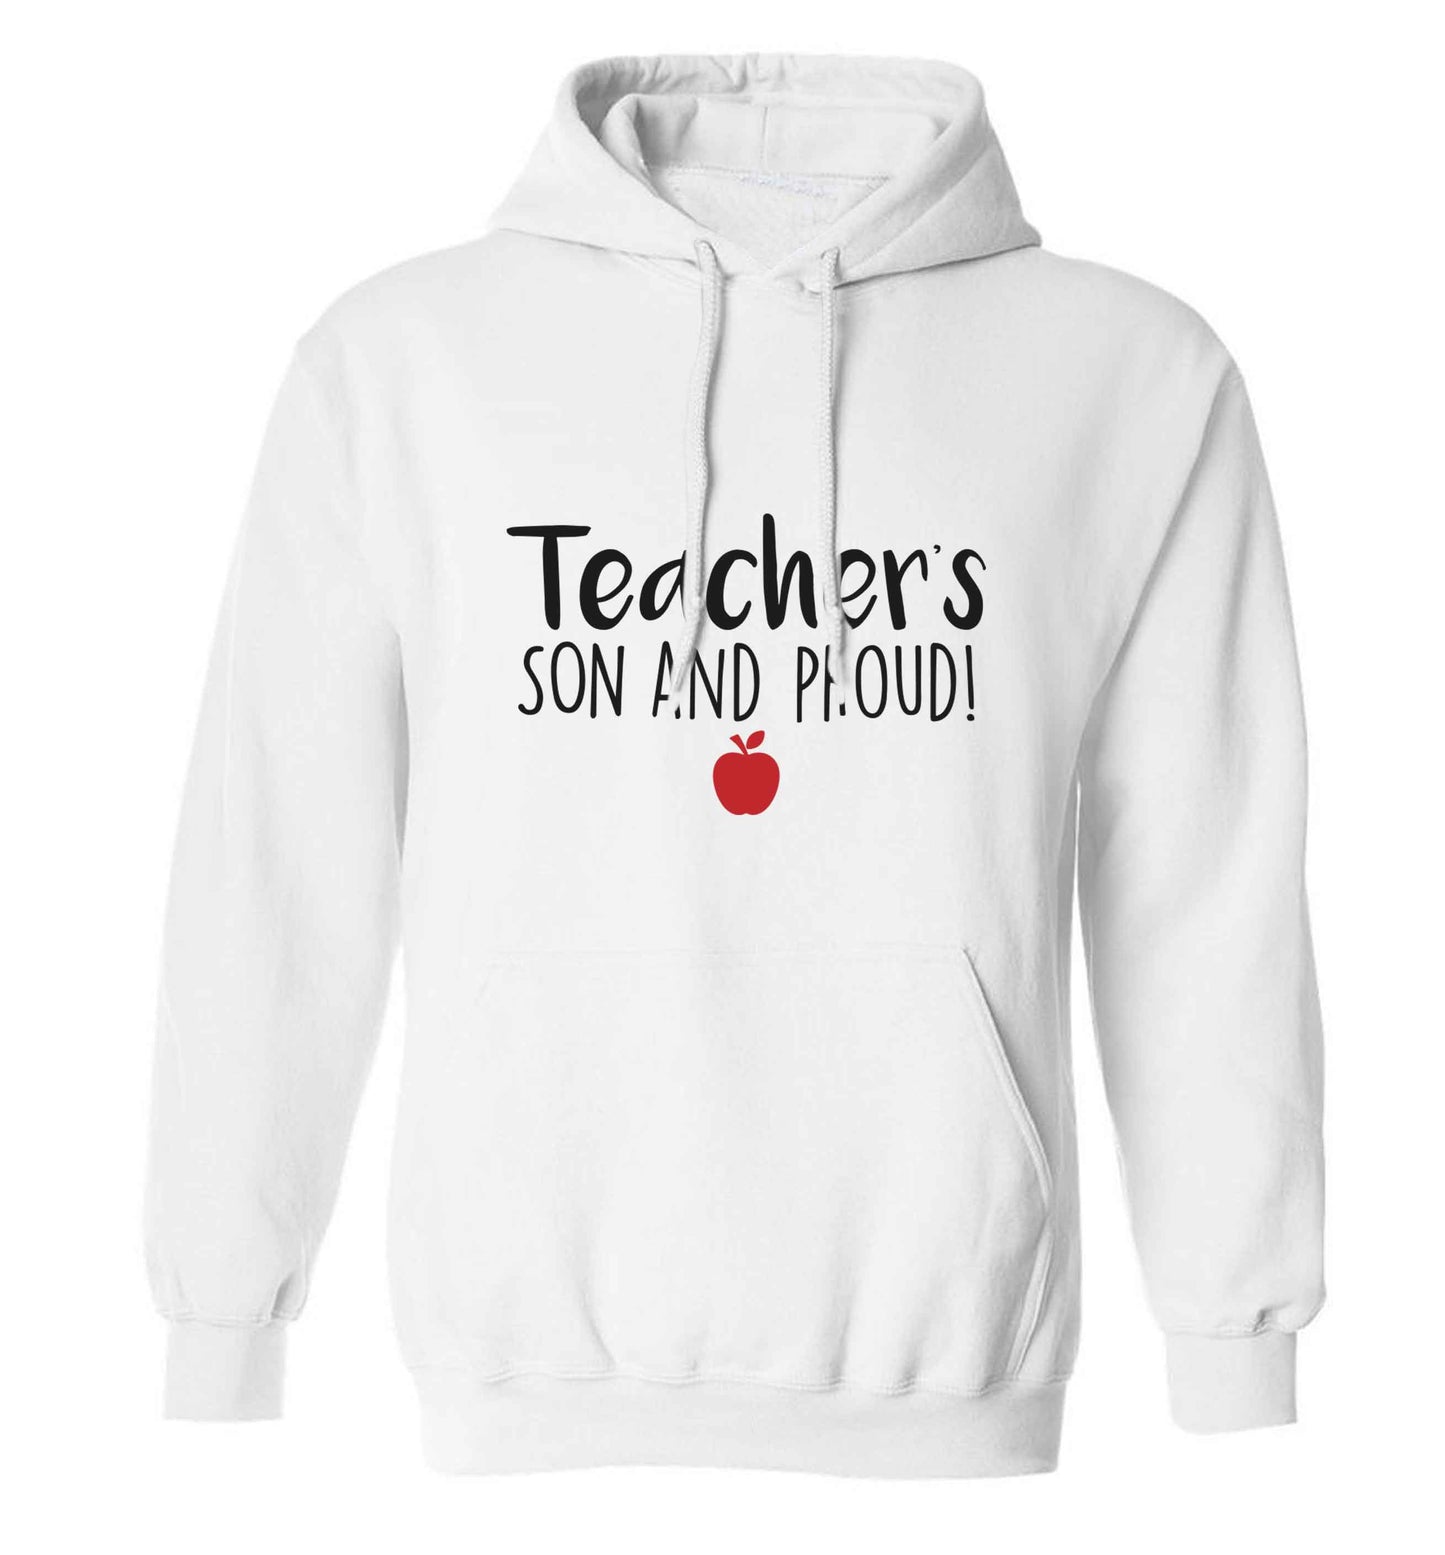 Teachers son and proud adults unisex white hoodie 2XL